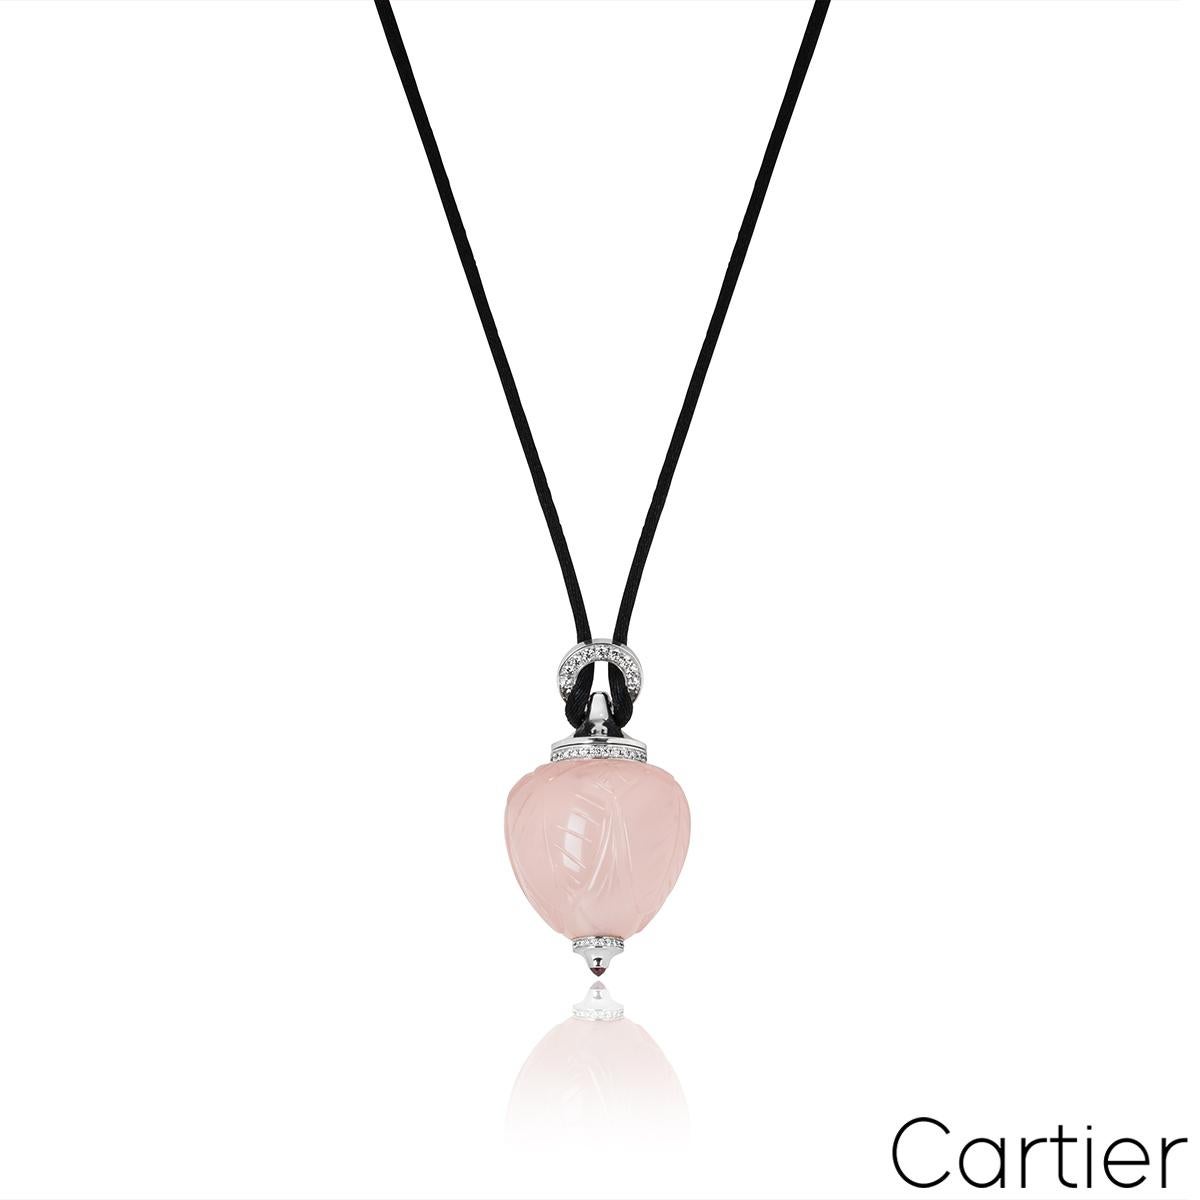 A rare 18k white gold Cartier perfume bottle pendant from the Inde Mystérieuse collection. The body of the pendant features rose quartz with carved leaf motifs throughout. Further complementing the intricate design are 62 round brilliant cut